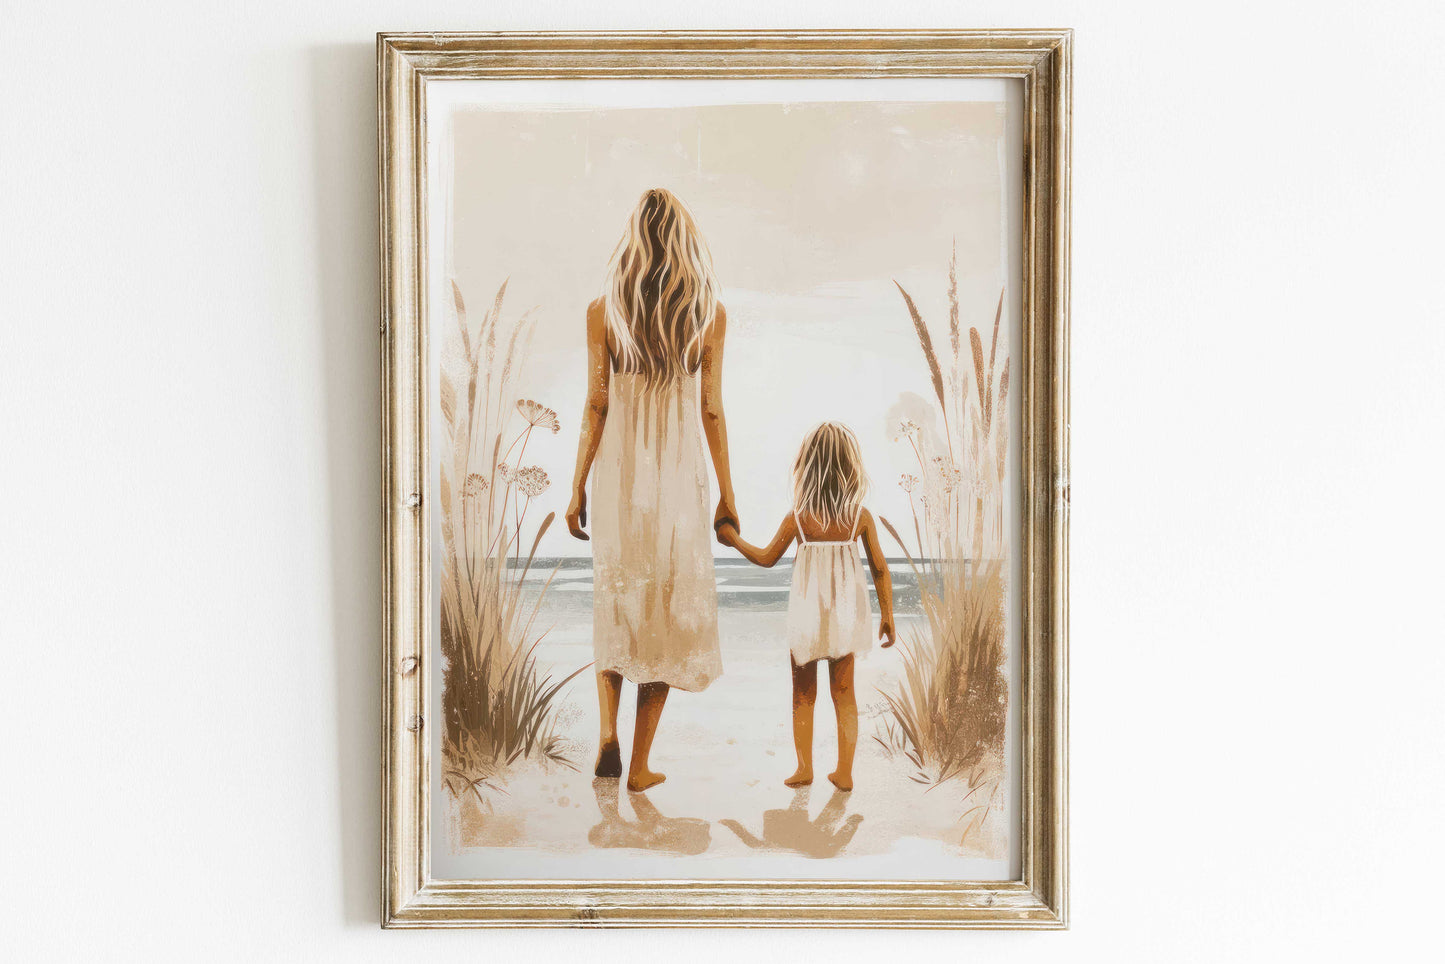 Mother & Daughter Art, Daughter and Mother Wall Art, Girl Beach Art, Mom Daughter Painting, Rustic Nursery Decor Girl, PRINTABLE Family Art